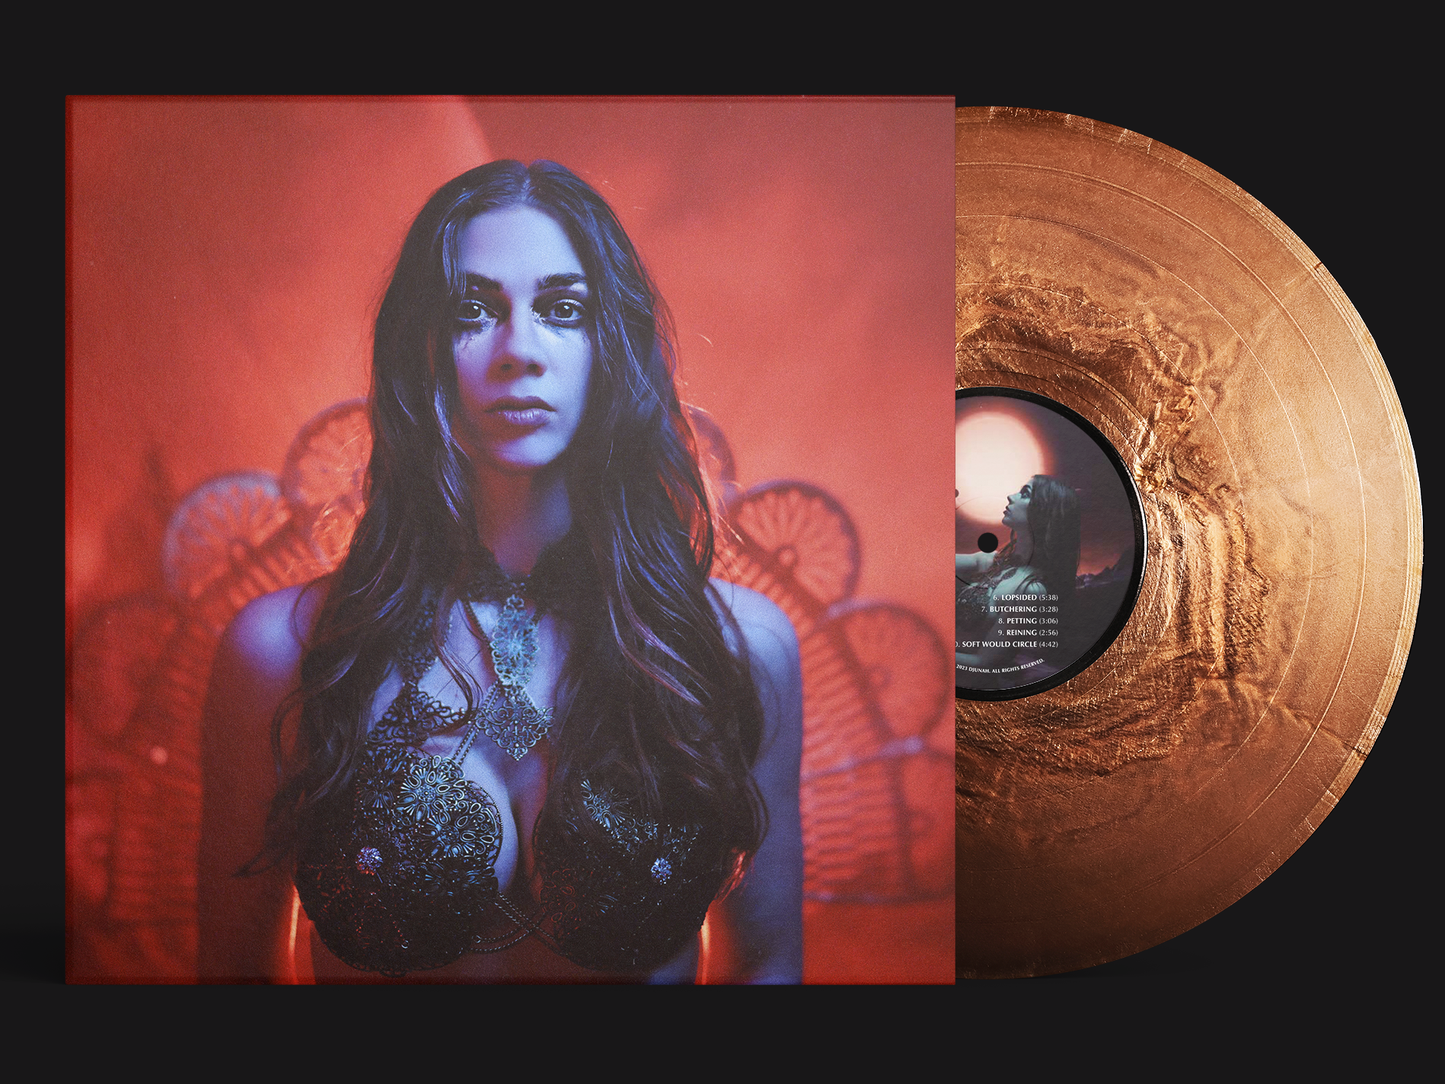 Djunah "Femina Furens" second pressing 12" vinyl LP on molten copper, front cover, pressed by Smashed Plastic in Chicago, Illinois